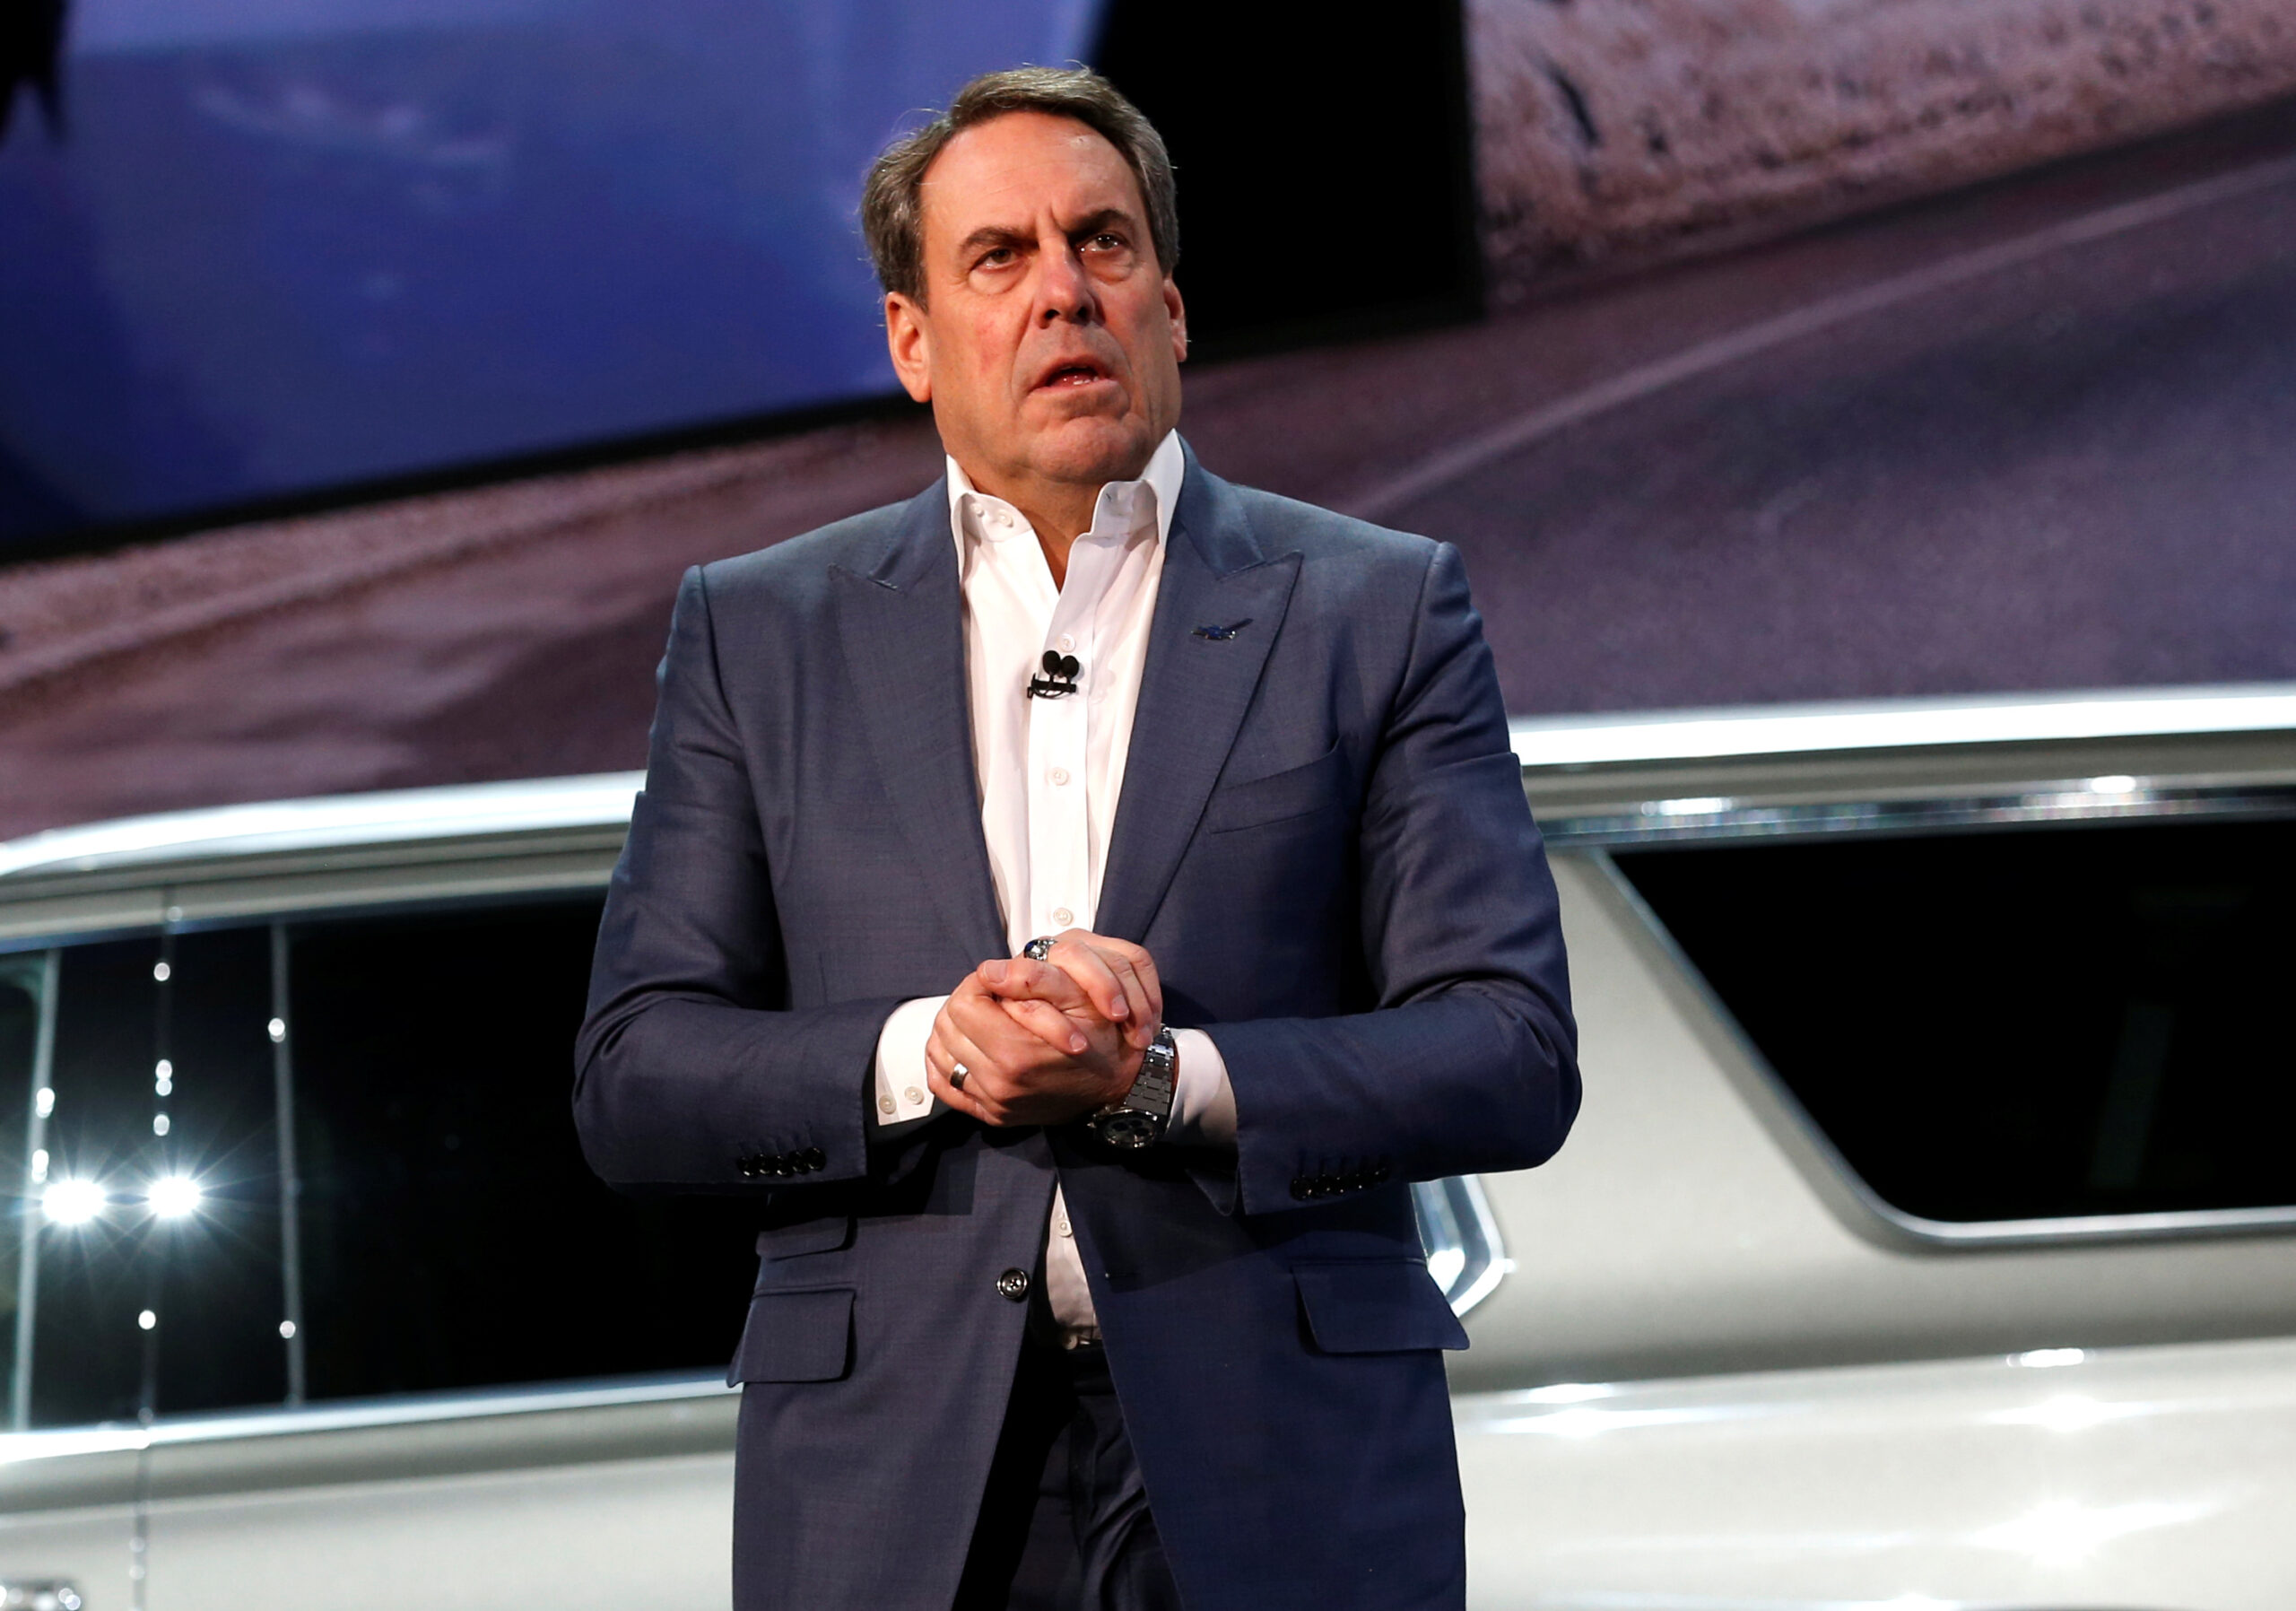 General Motors President Reuss talks about the Chevrolet 2021 Suburban and Tahoe SUVs in Detroit